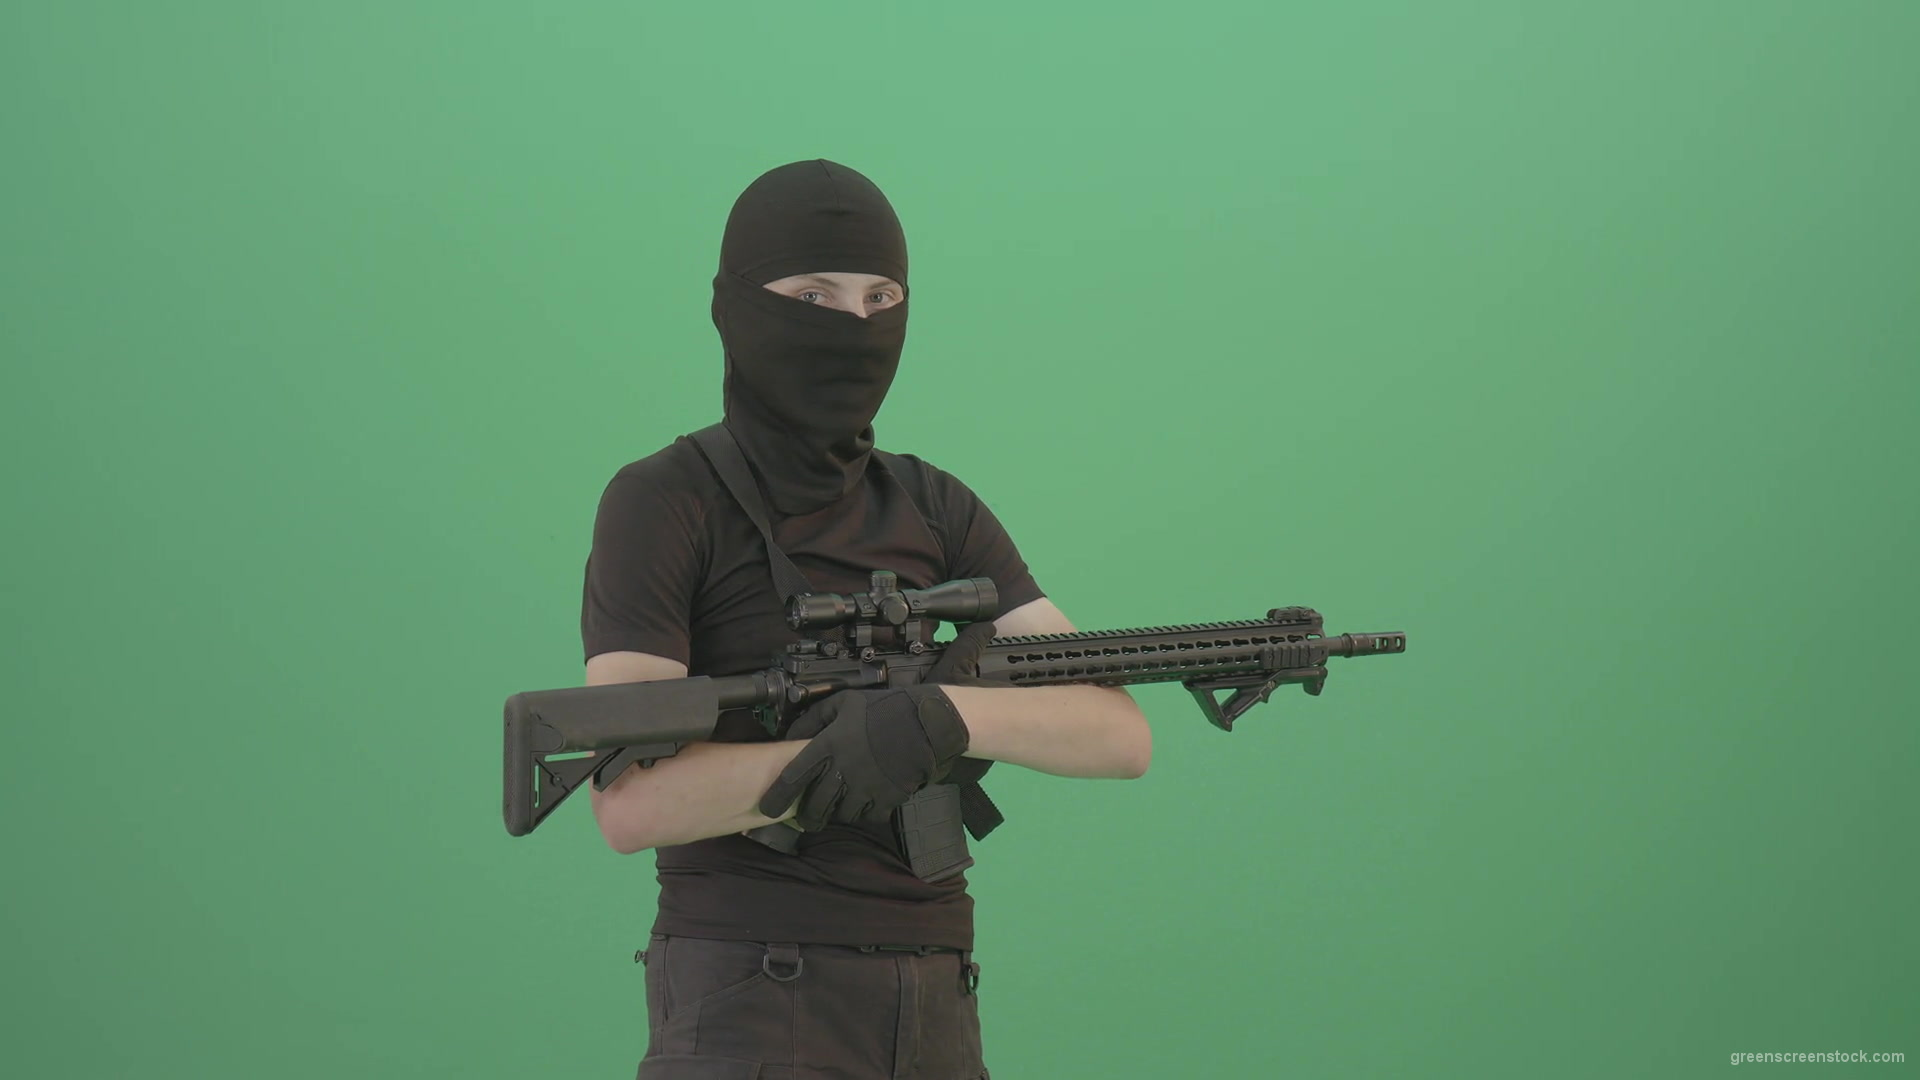 Soldier-man-with-weapon-looking-enemies-isolated-on-green-screen-4K-Video-Footage-1920_009 Green Screen Stock